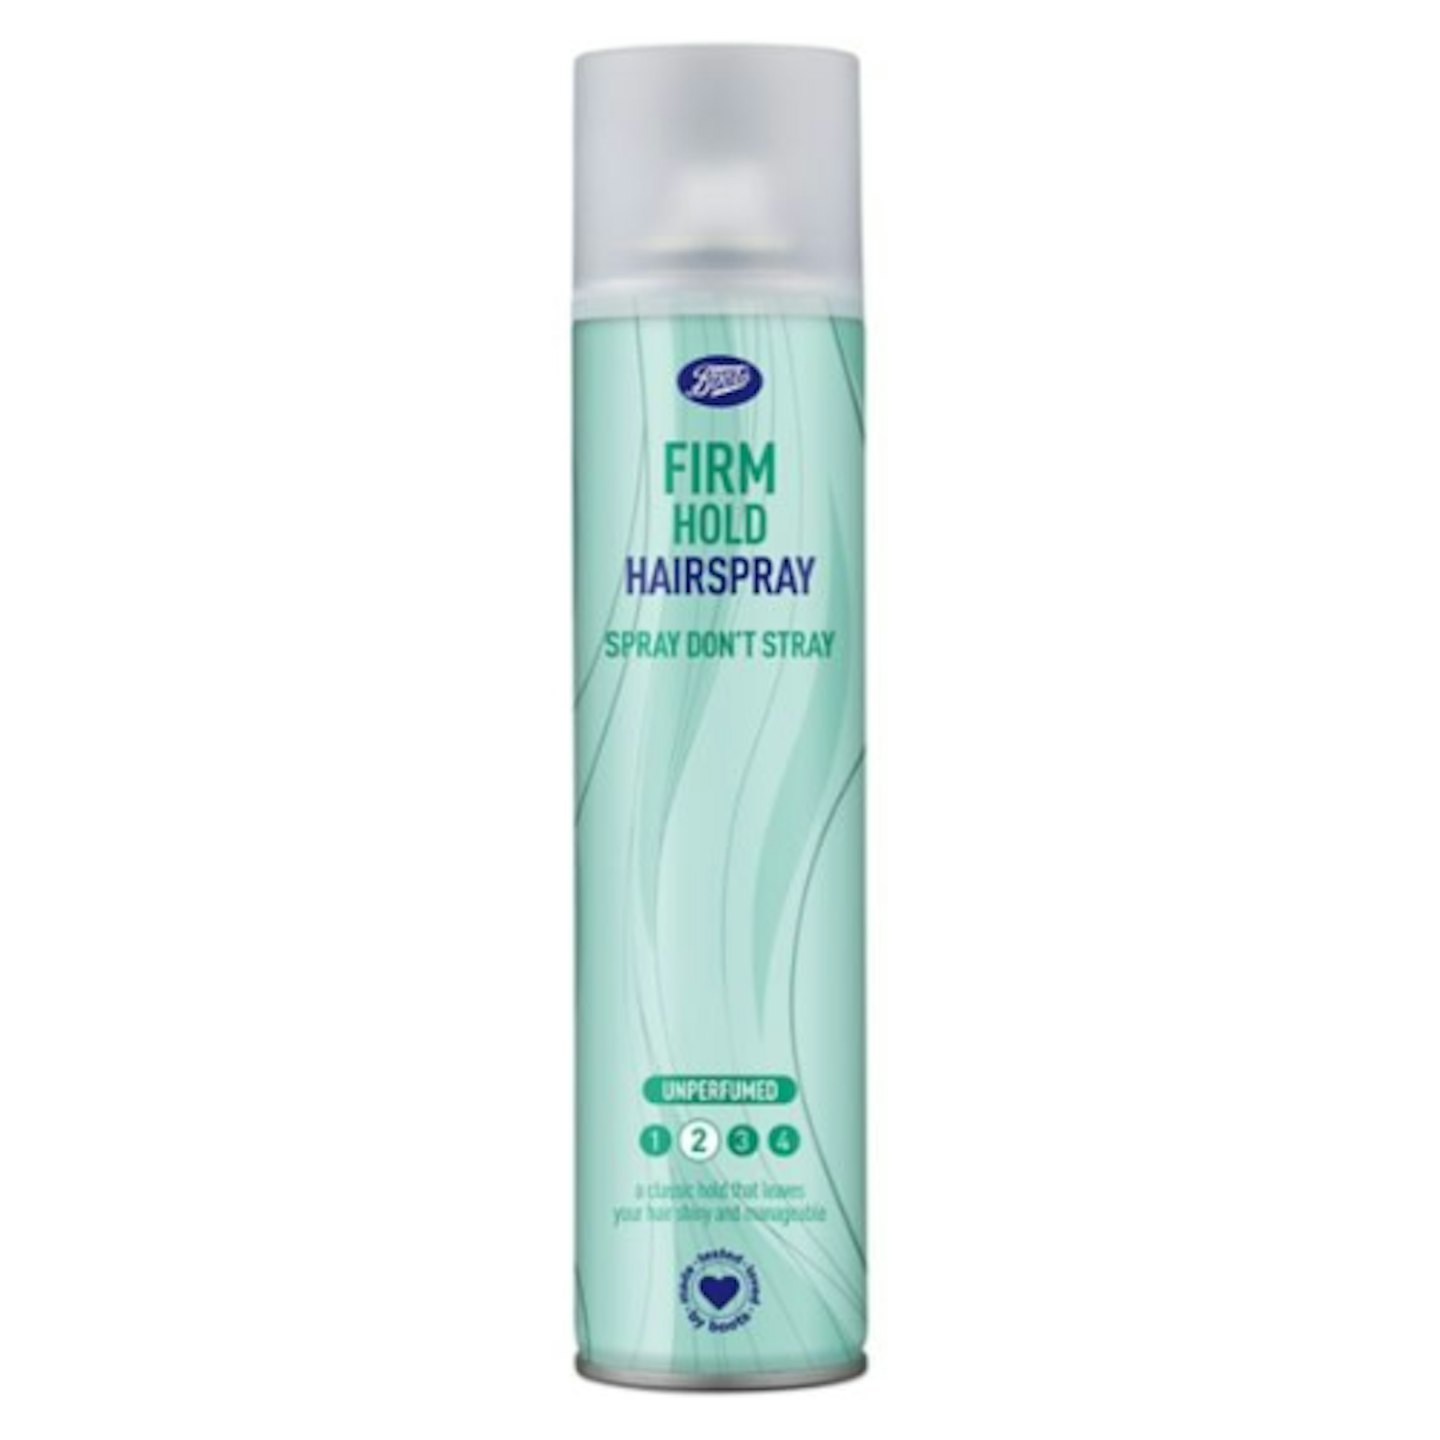 Boots everyday unperfumed hairspray firm hold 300ml